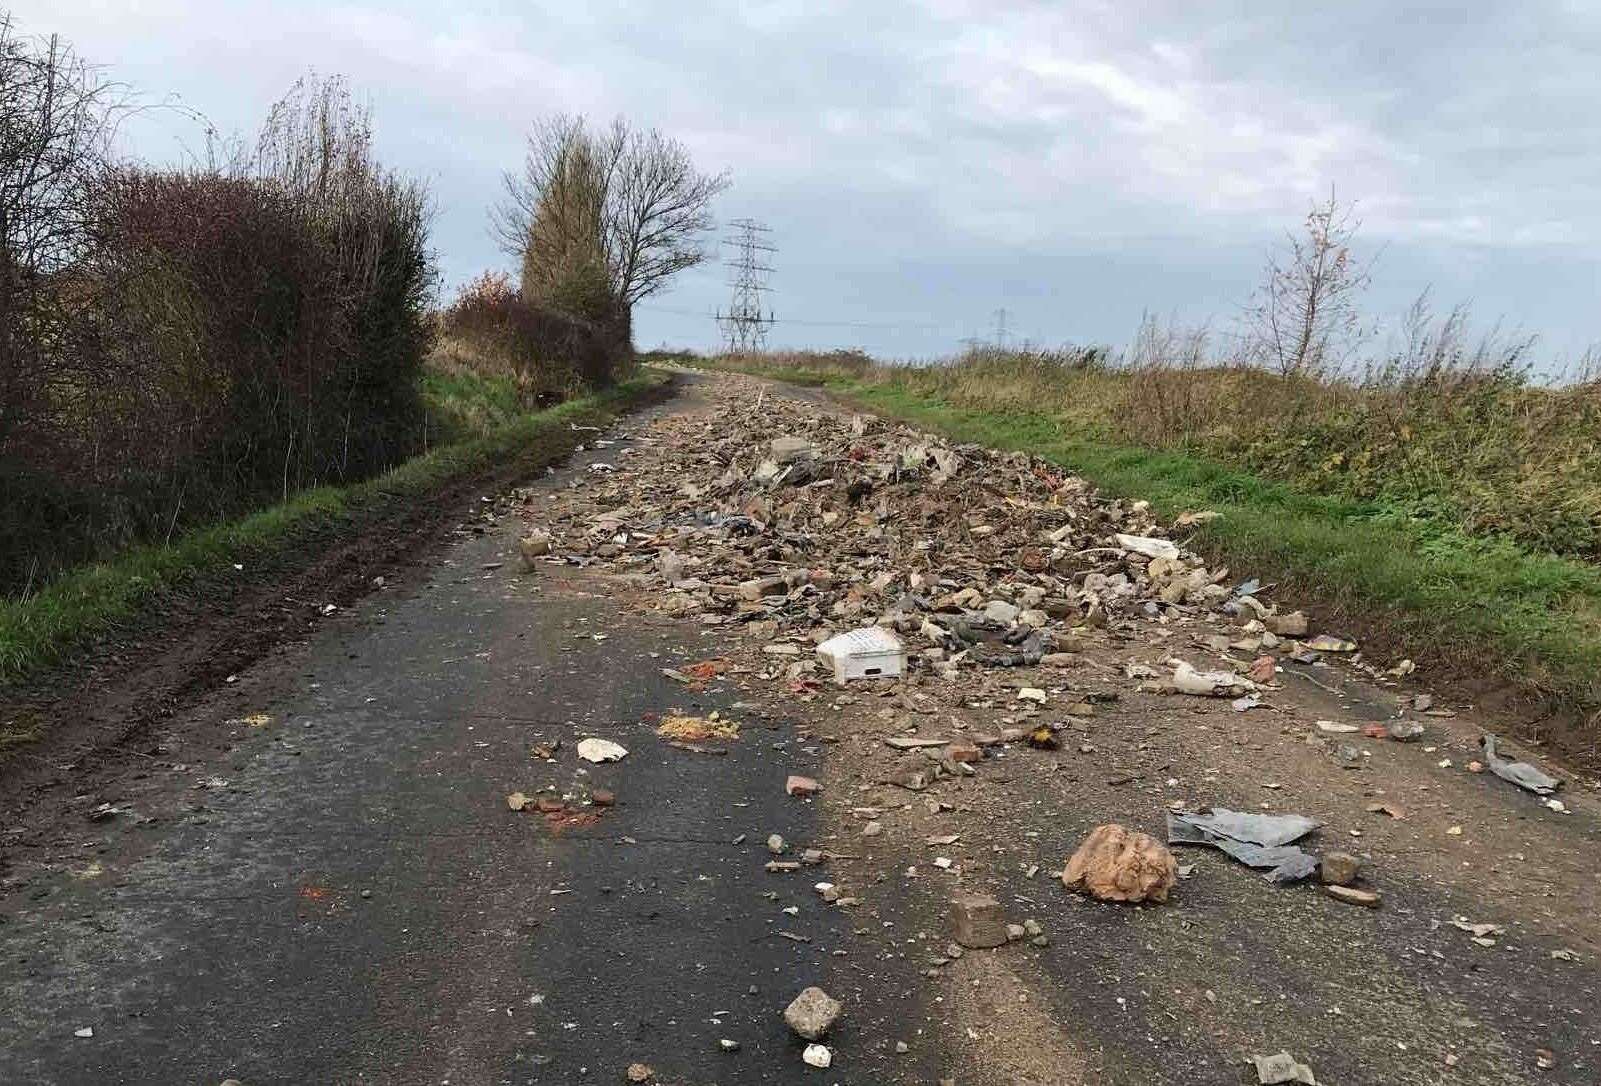 Fury over fly-tipping in Foxhounds Lane, Southfleet near Dartford as rubbish and rubble were strewn across the road. Picture: Dartford Borough Council